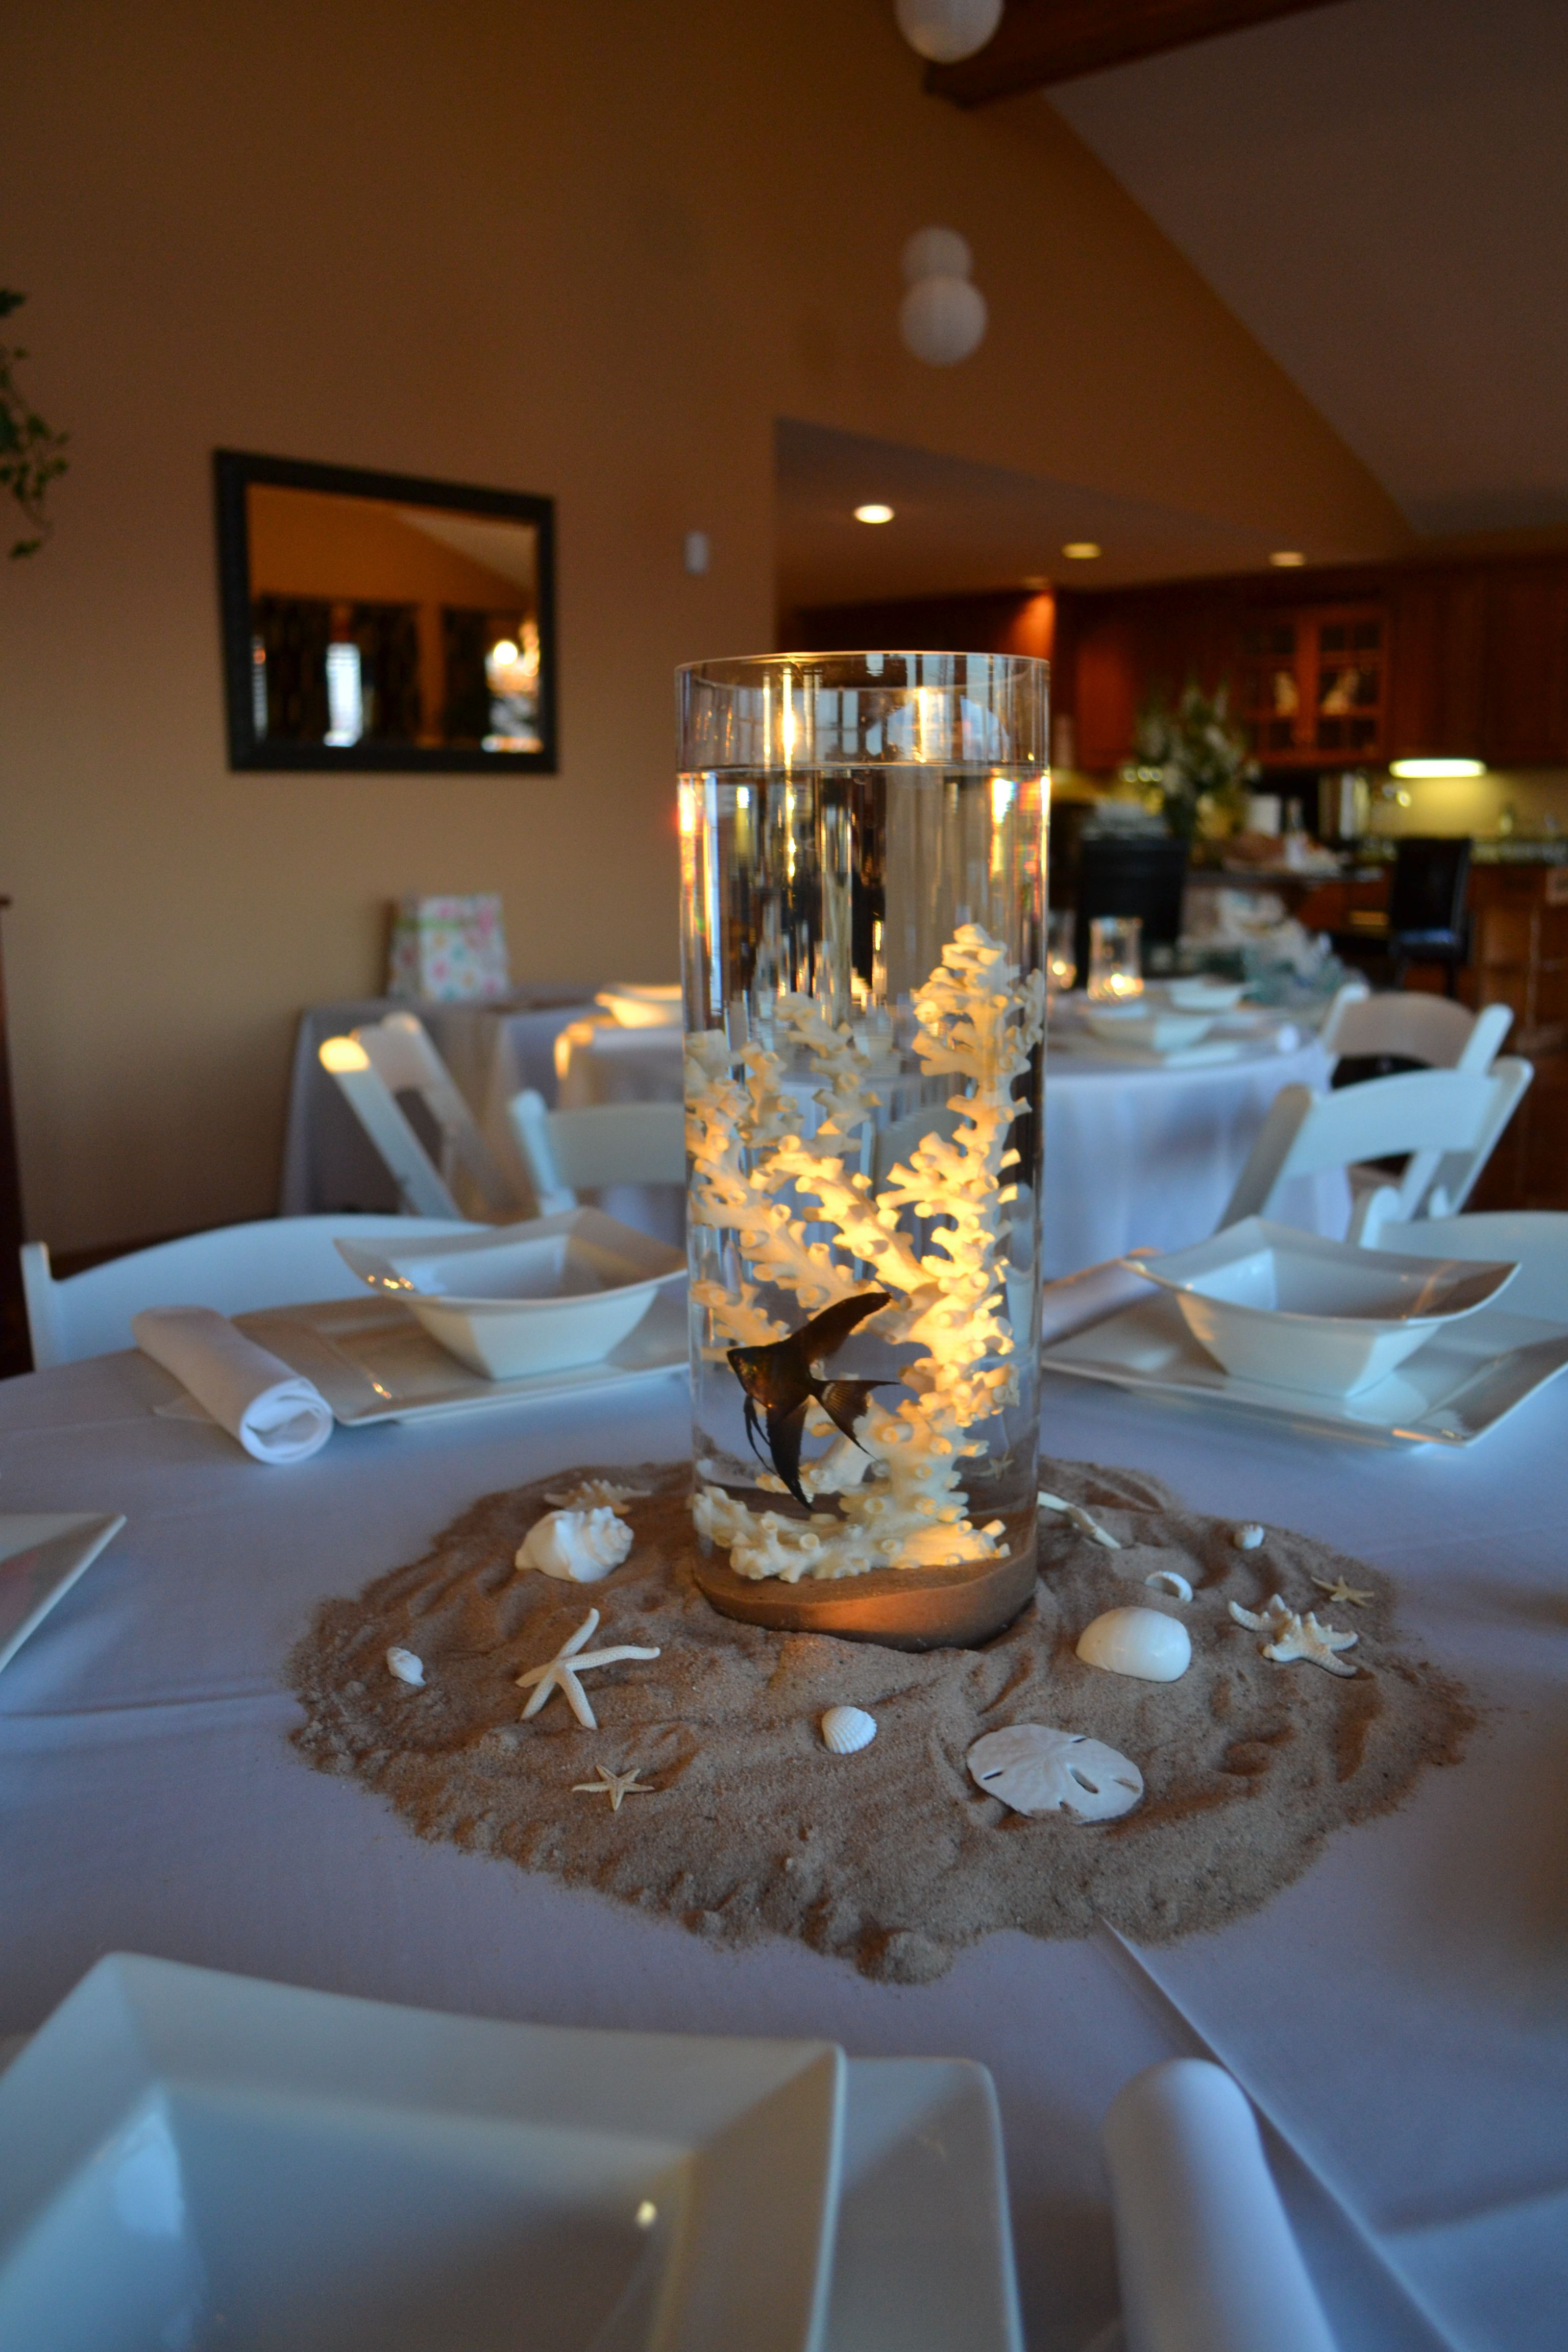 Centerpiece Ideas For Beach Theme Party
 Centerpieces for beach themed baby shower with real fish